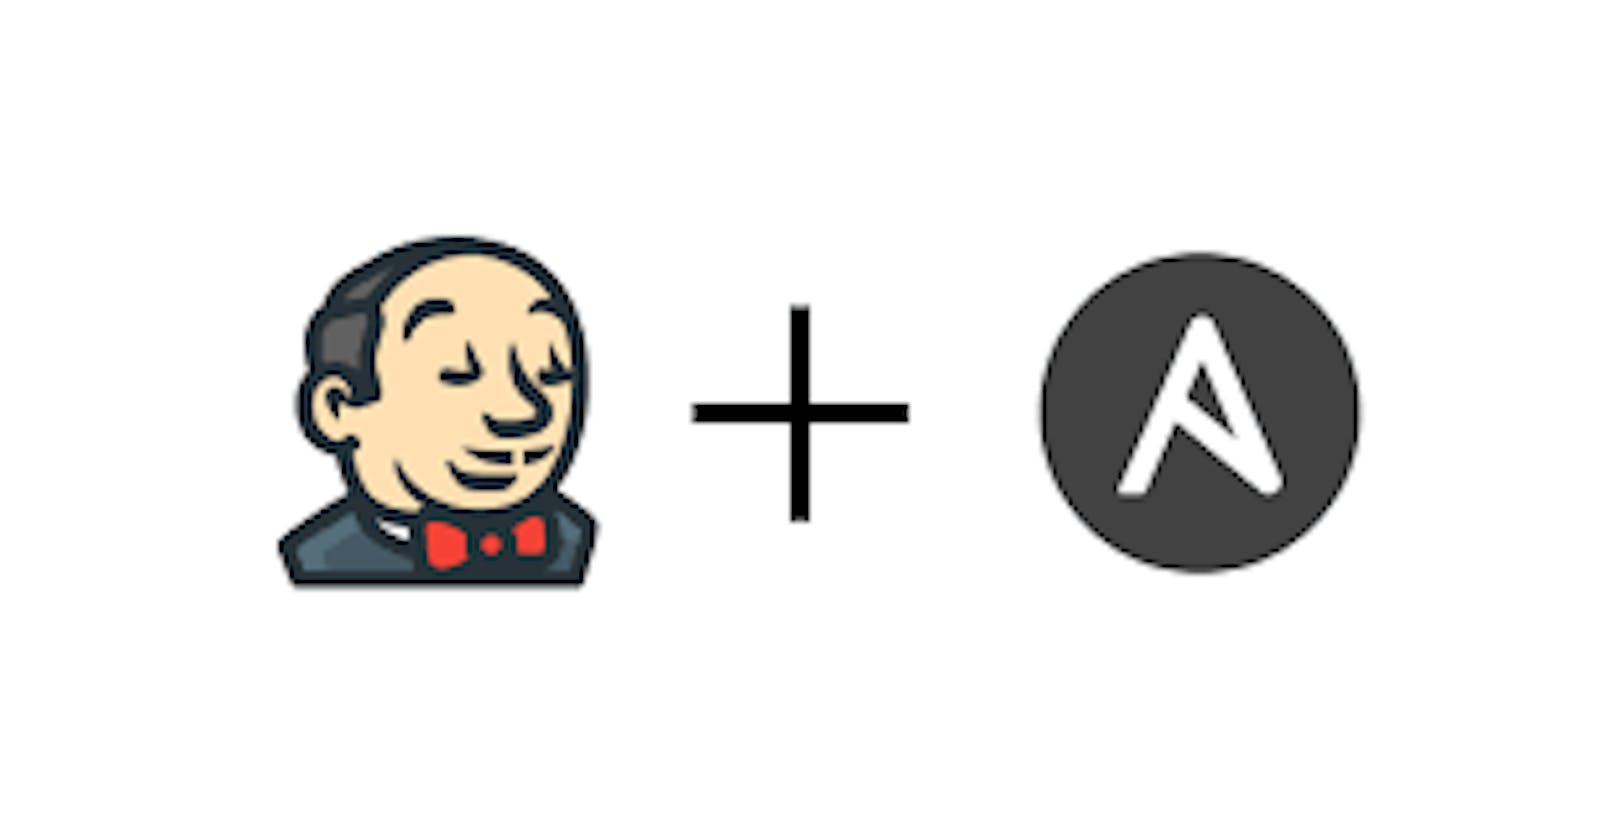 Environment Variables Update Automation using Ansible and Jenkins